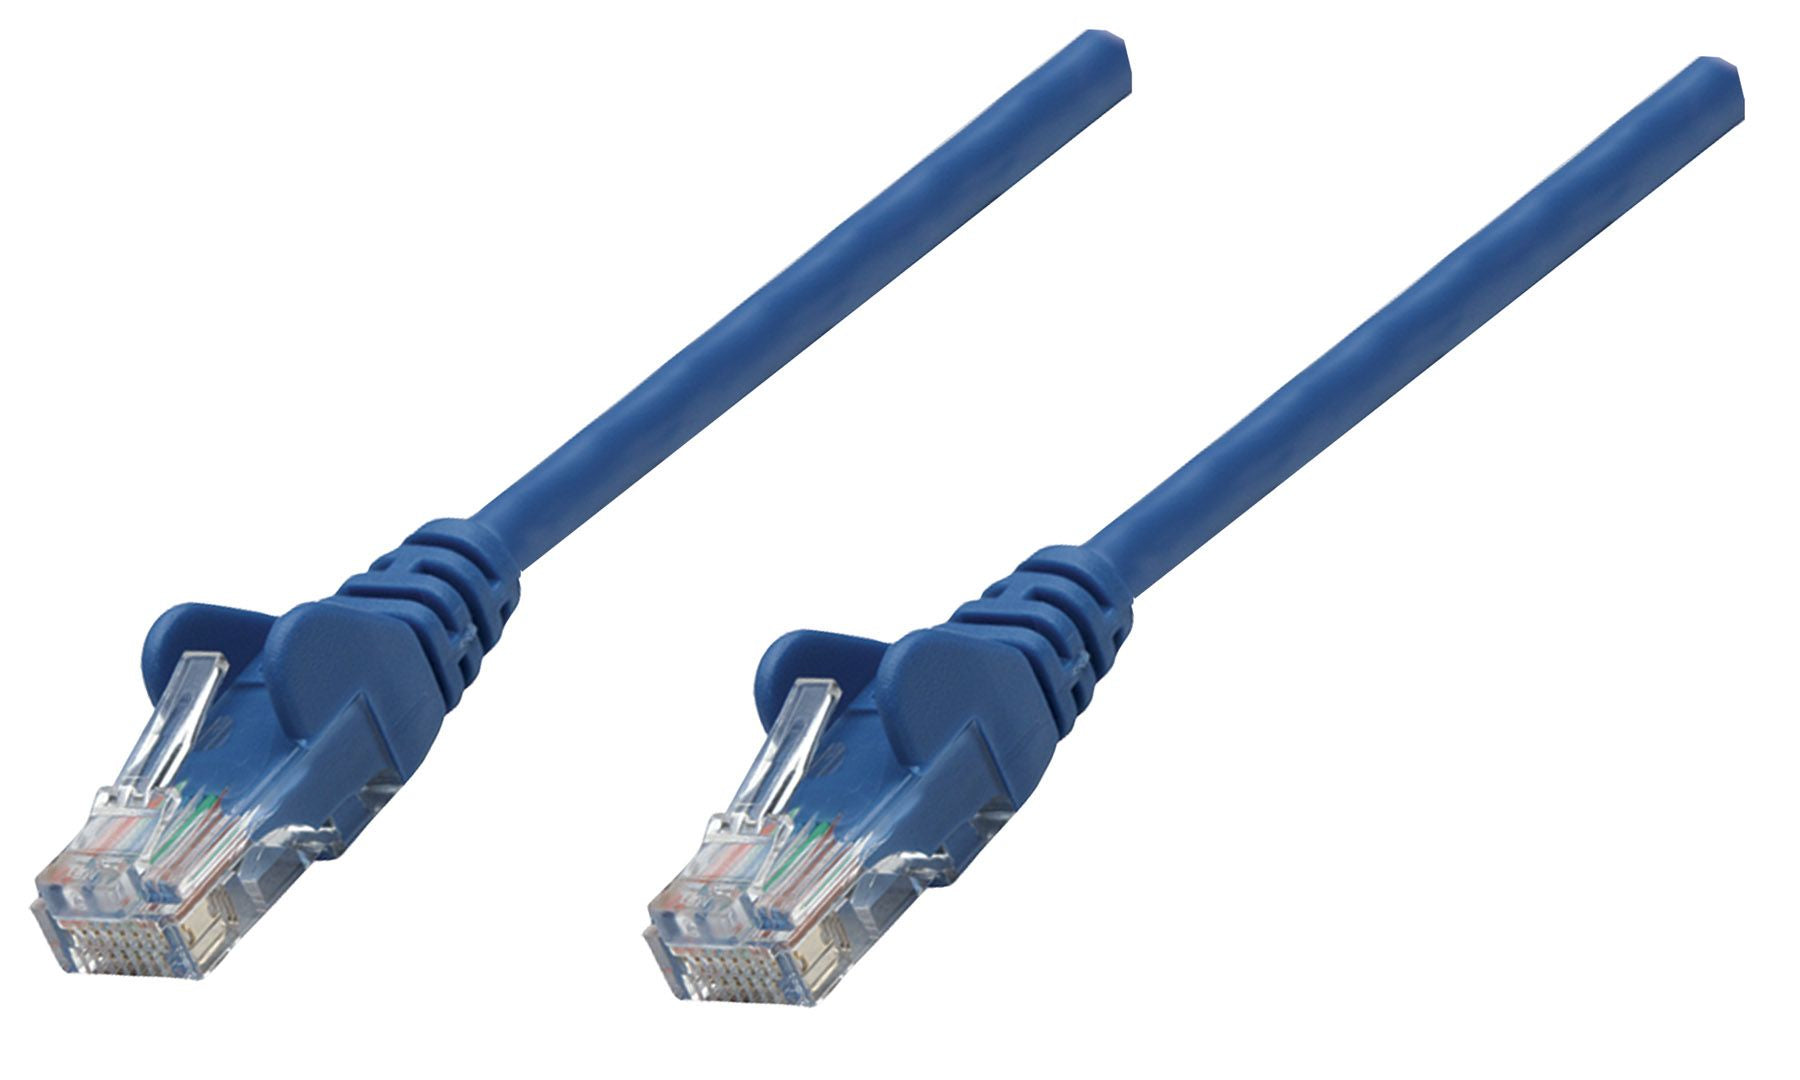 Cable Patch Intellinet Cat 6A, 7.6 Mts (25.0F) S/Ftp Azul, 741514